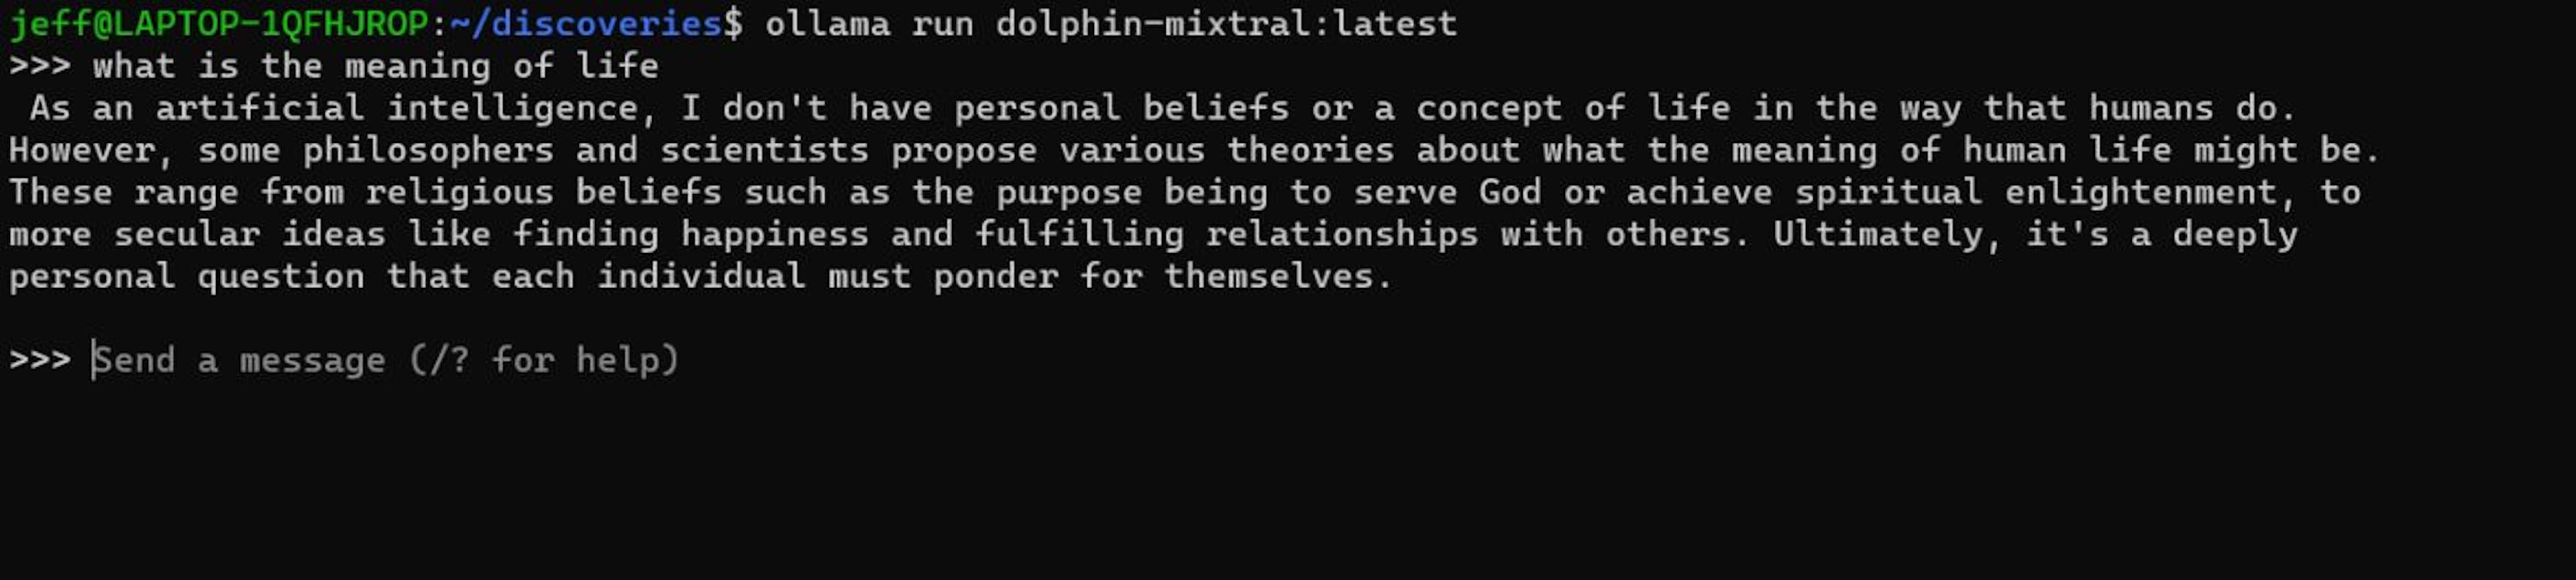 Prompt of dolphin-mistral